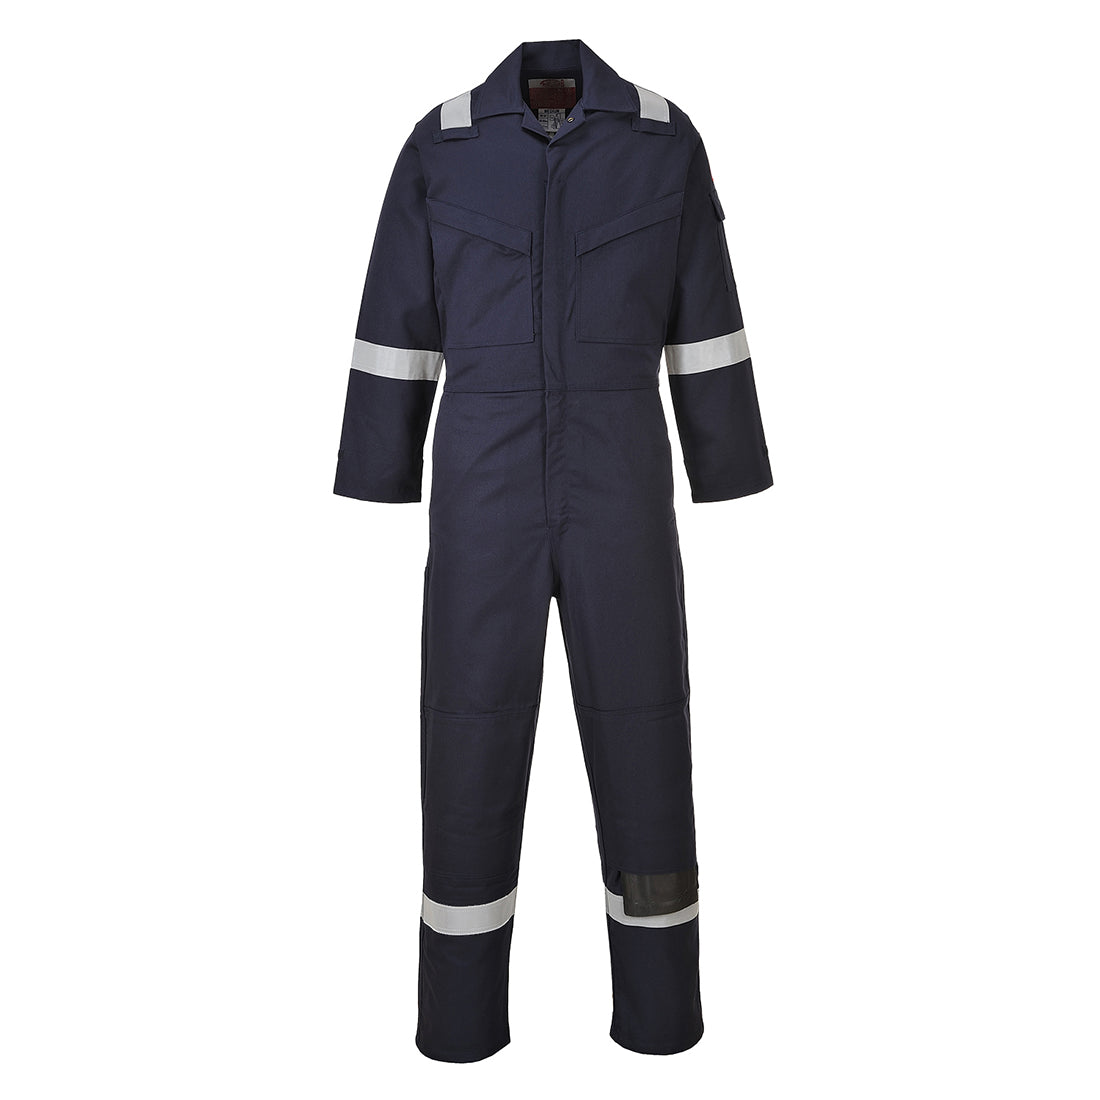 Portwest FR50 Navy Sz M Tall Flame Resistant Anti-Static Boiler Suit Coverall Overall